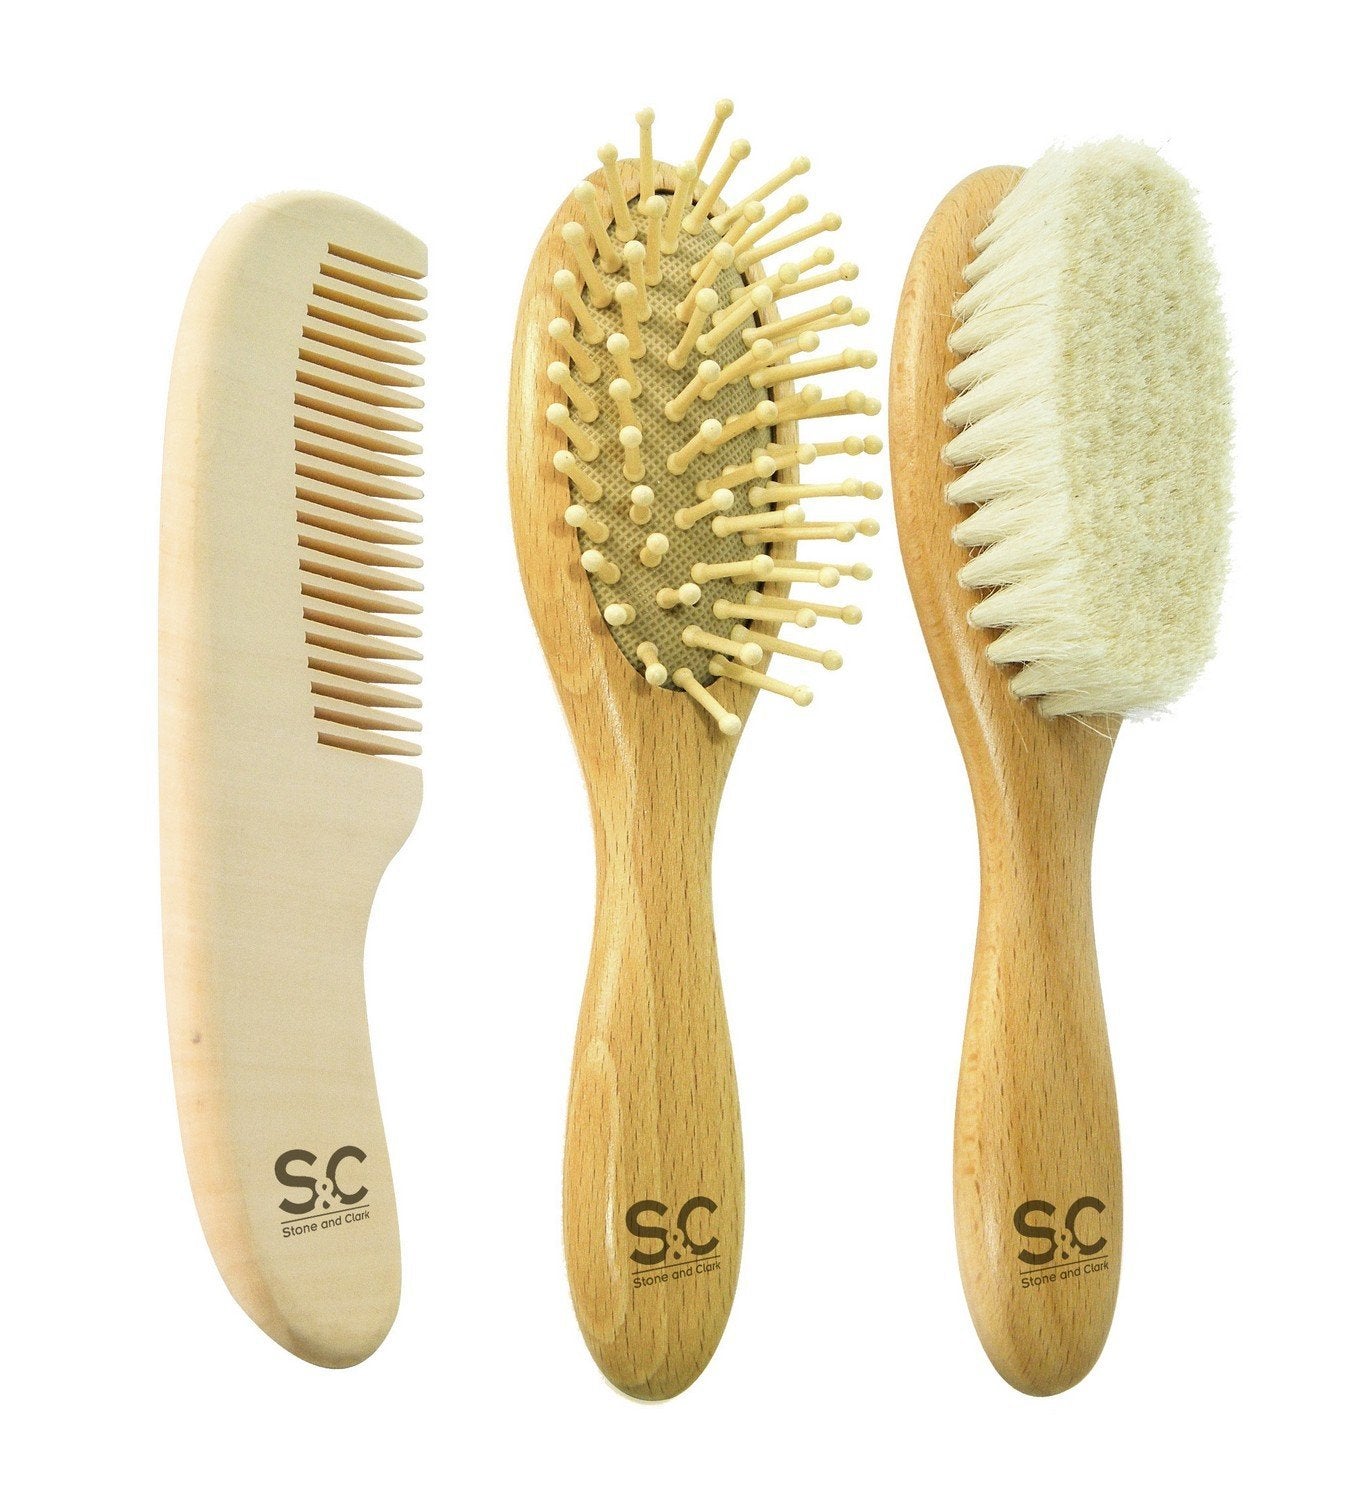 Baby Hair Brush and Baby Comb Set for Newborn, Boy and Girl - Wooden Baby Brush w/Soft Goat Bristles for Cradle Cap - Infant, Toddler Hair Brush, Baby Grooming kit, Soft Hair Brush by Stone & Clark